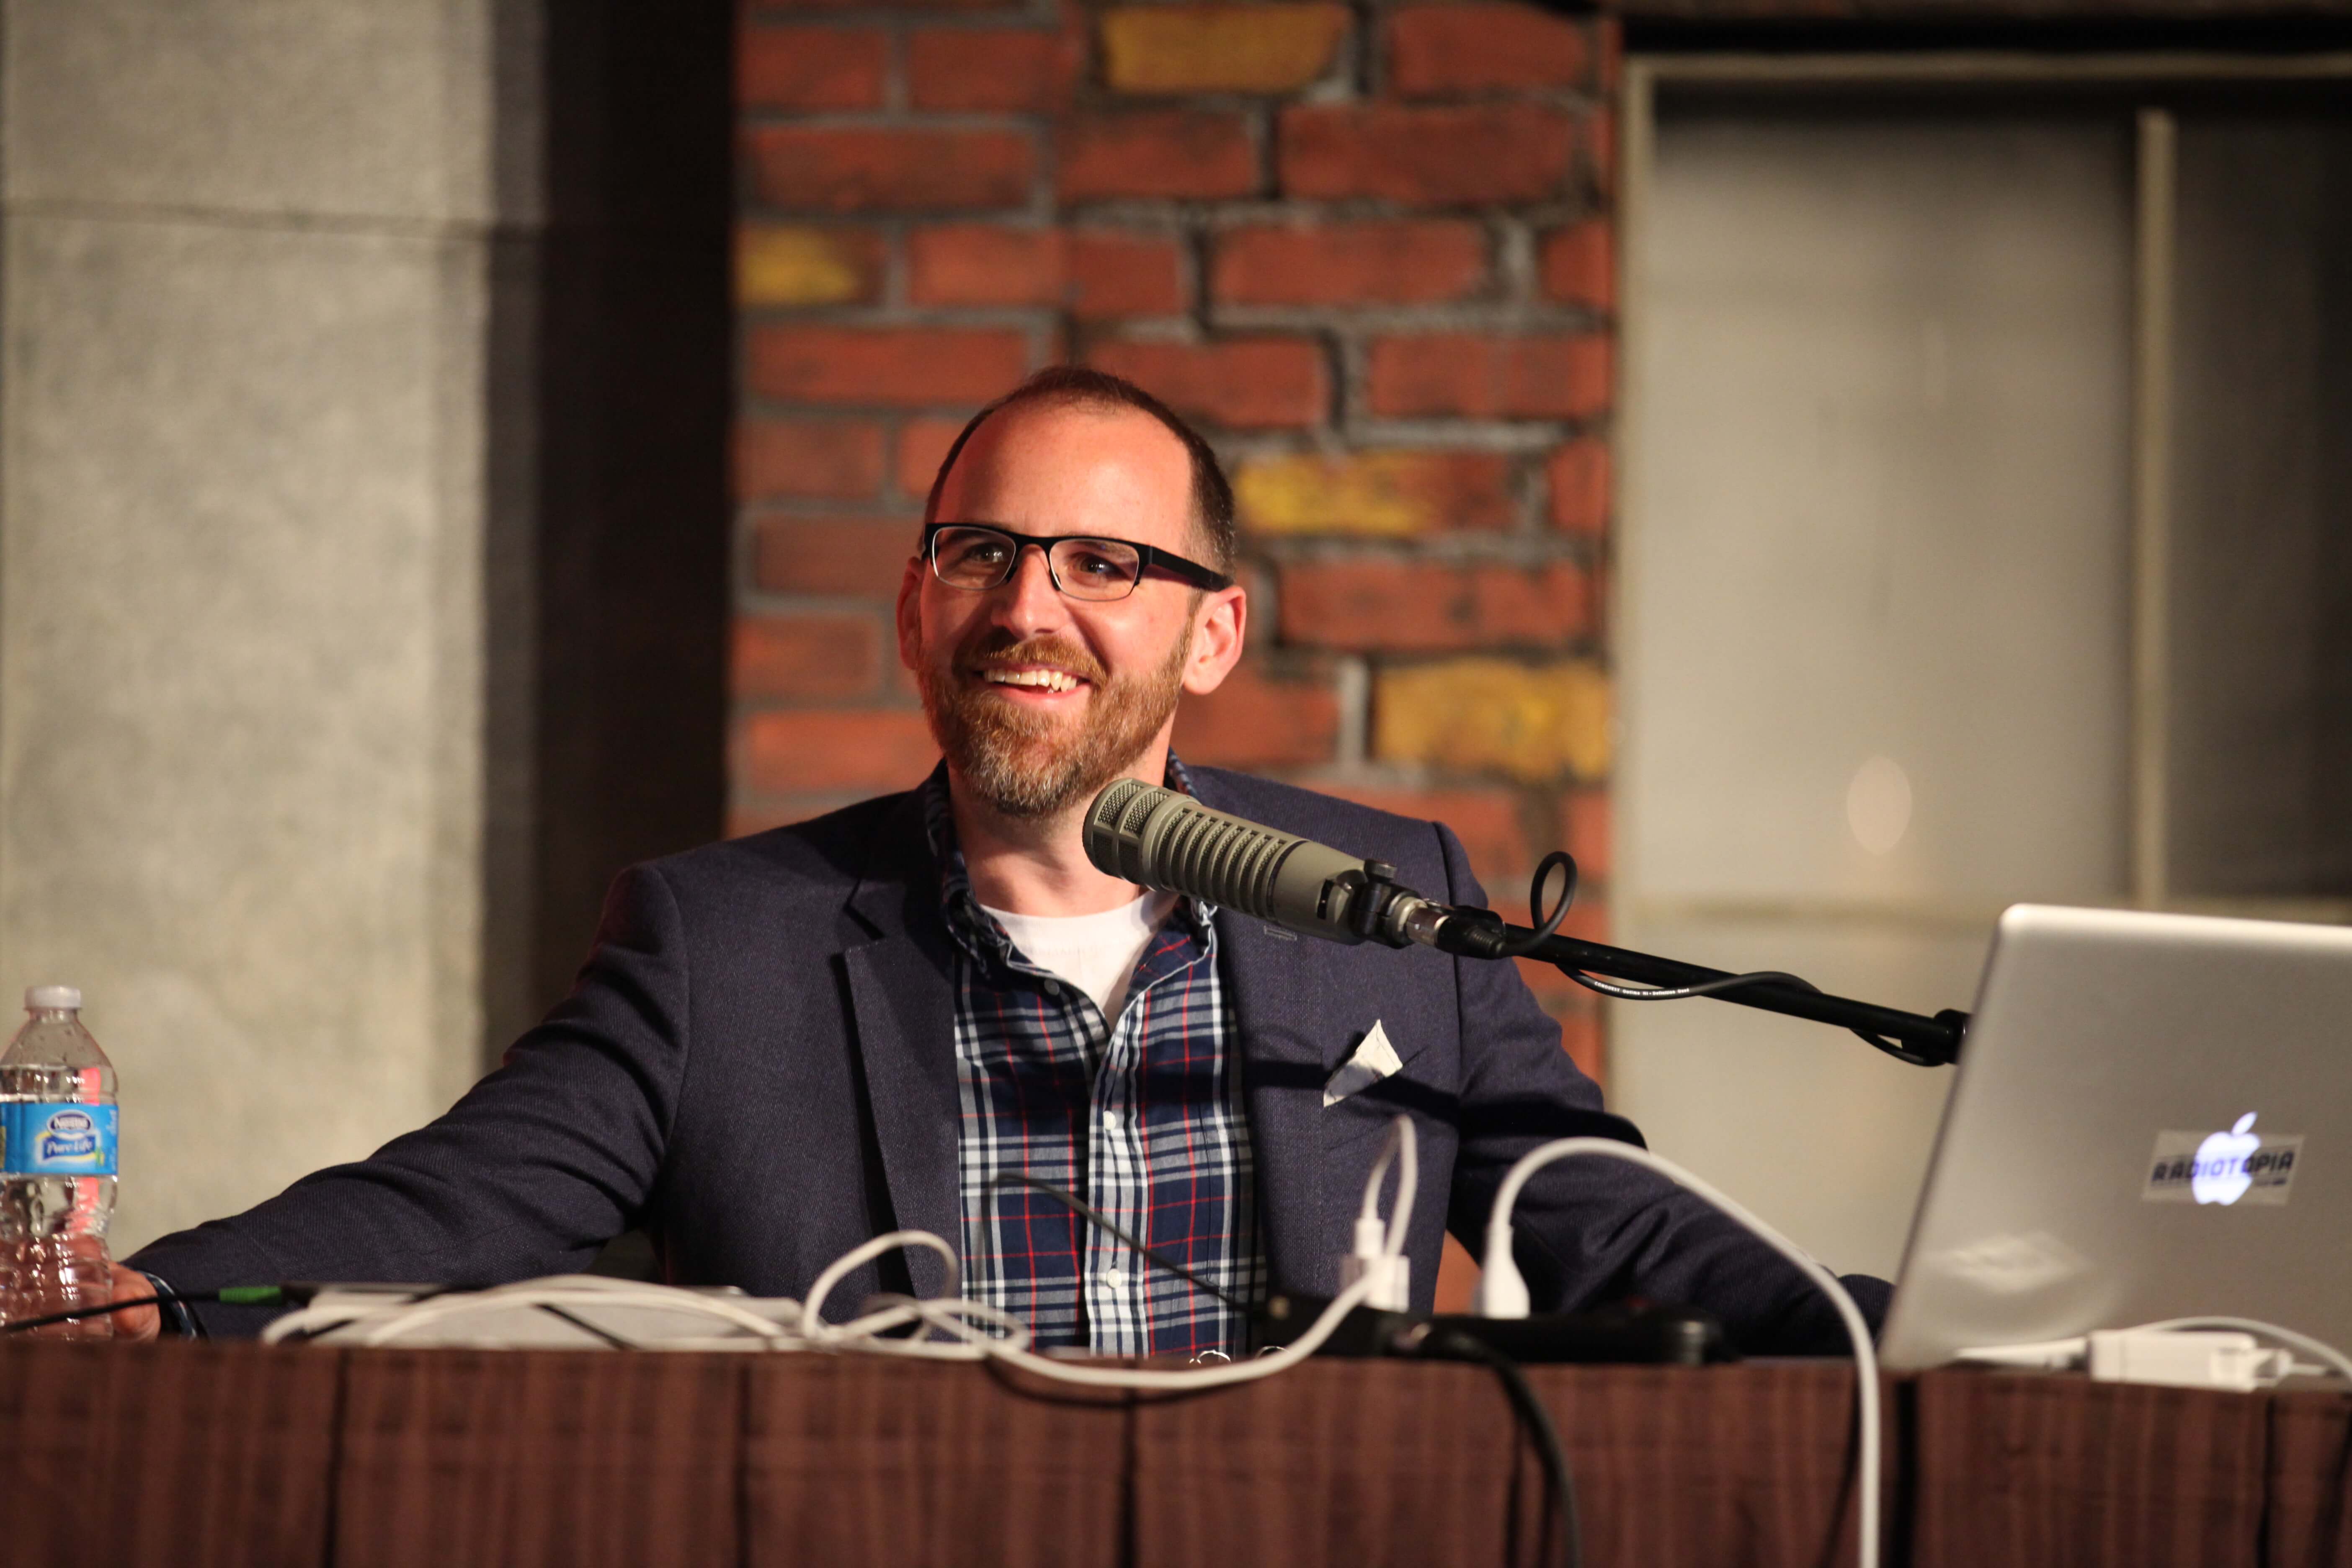 Podcaster Roman Mars, "99% Invisible," at Podcast Movement 2015